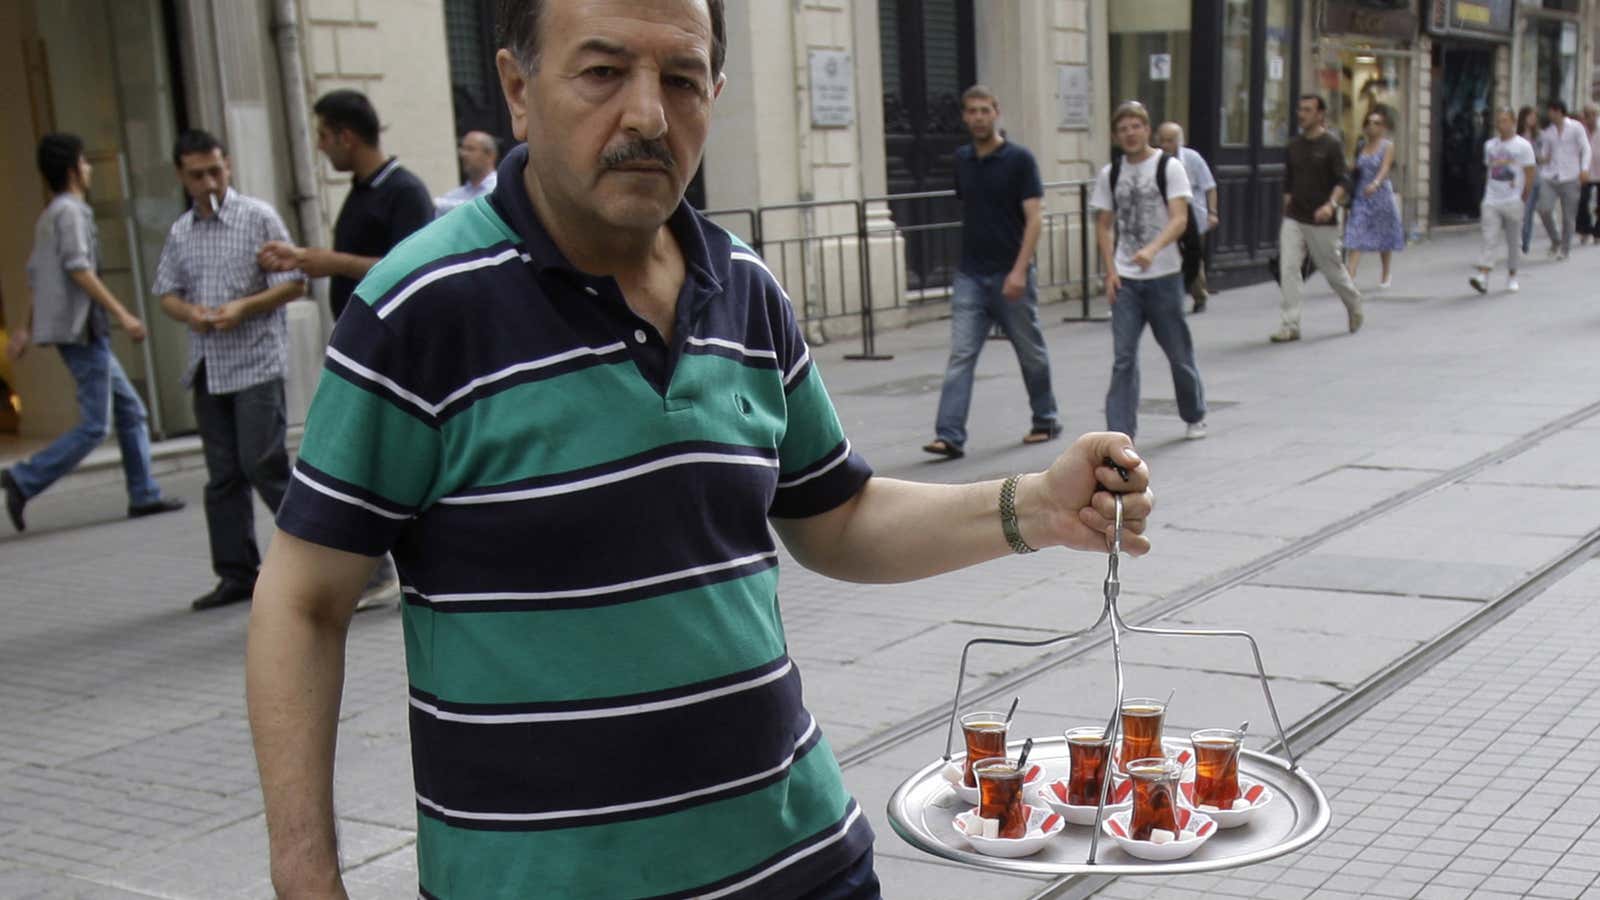 If only Turkey could balance its capital flows as ably as this vendor and his tray of tea.